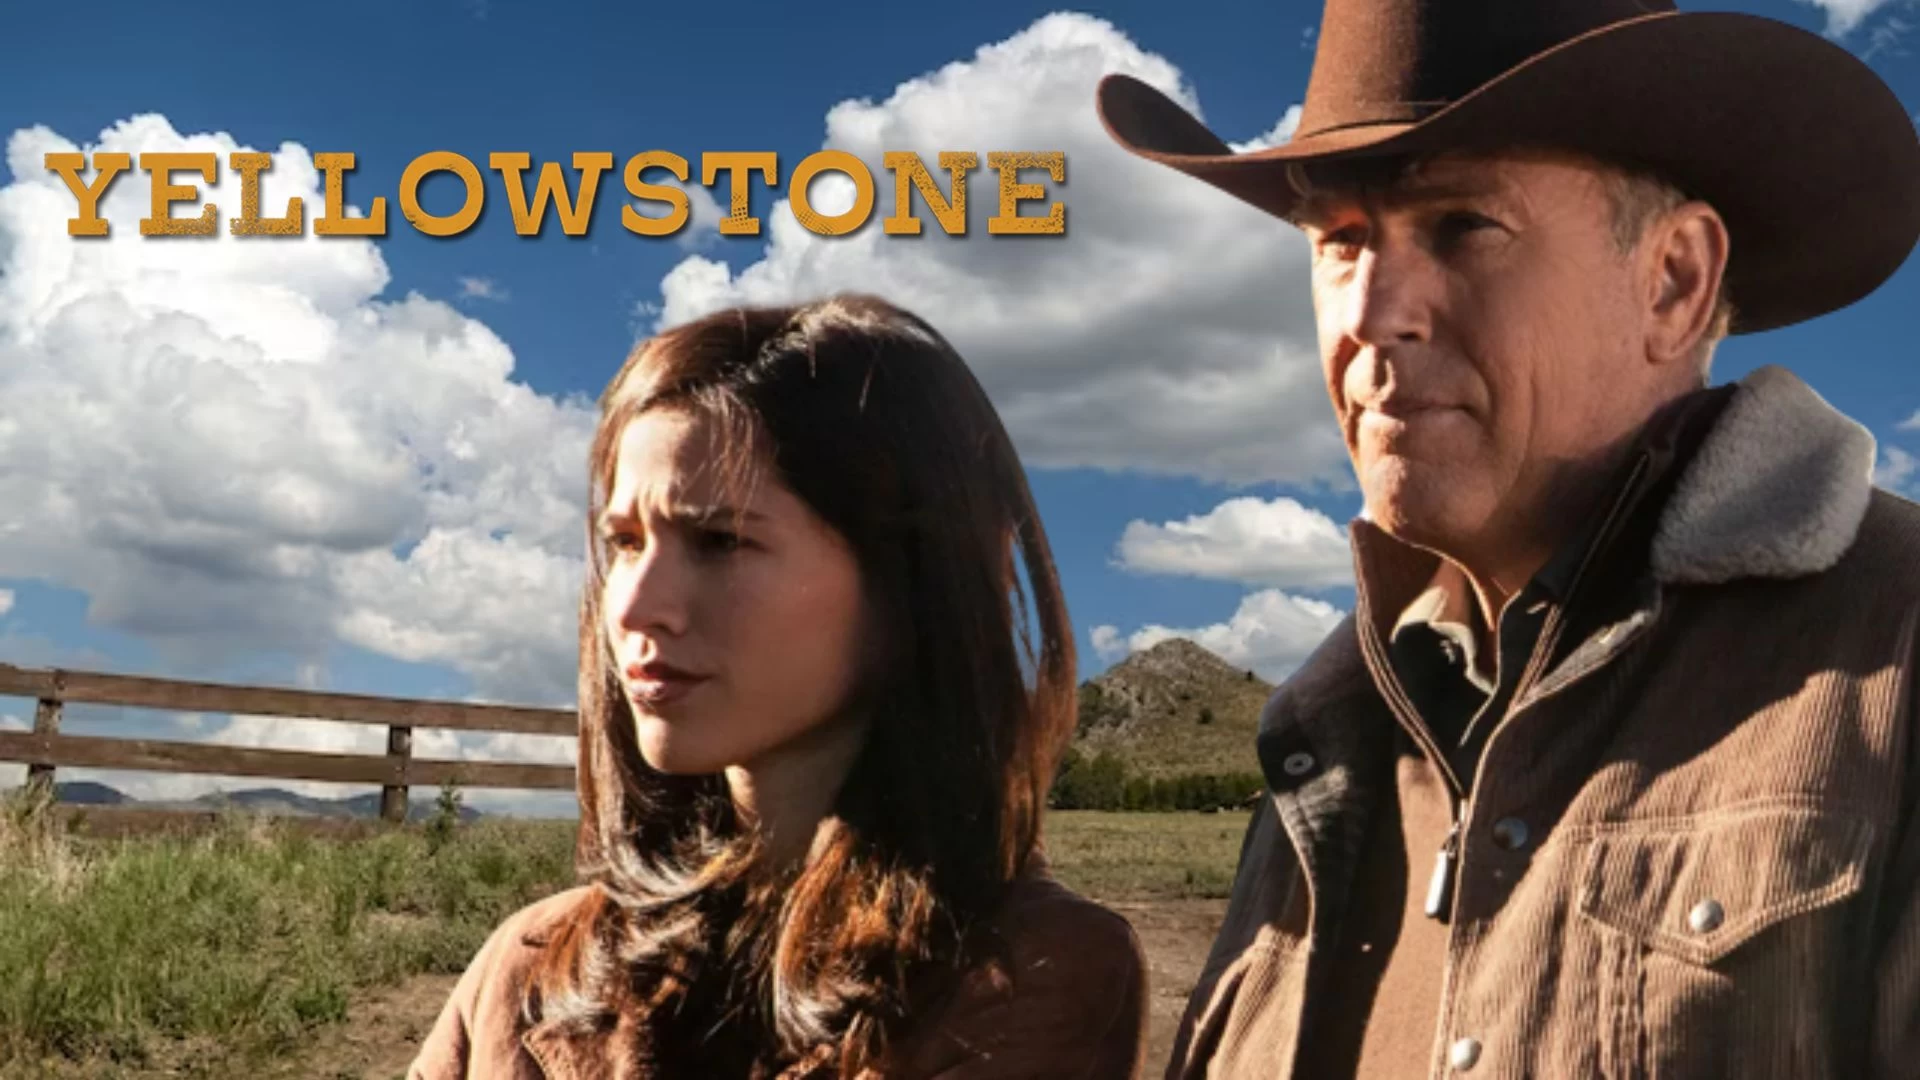 Yellowstone Season 1 Episode 6 Ending Explained, Release Date, Cast, Plot, Review, Where to Watch And More